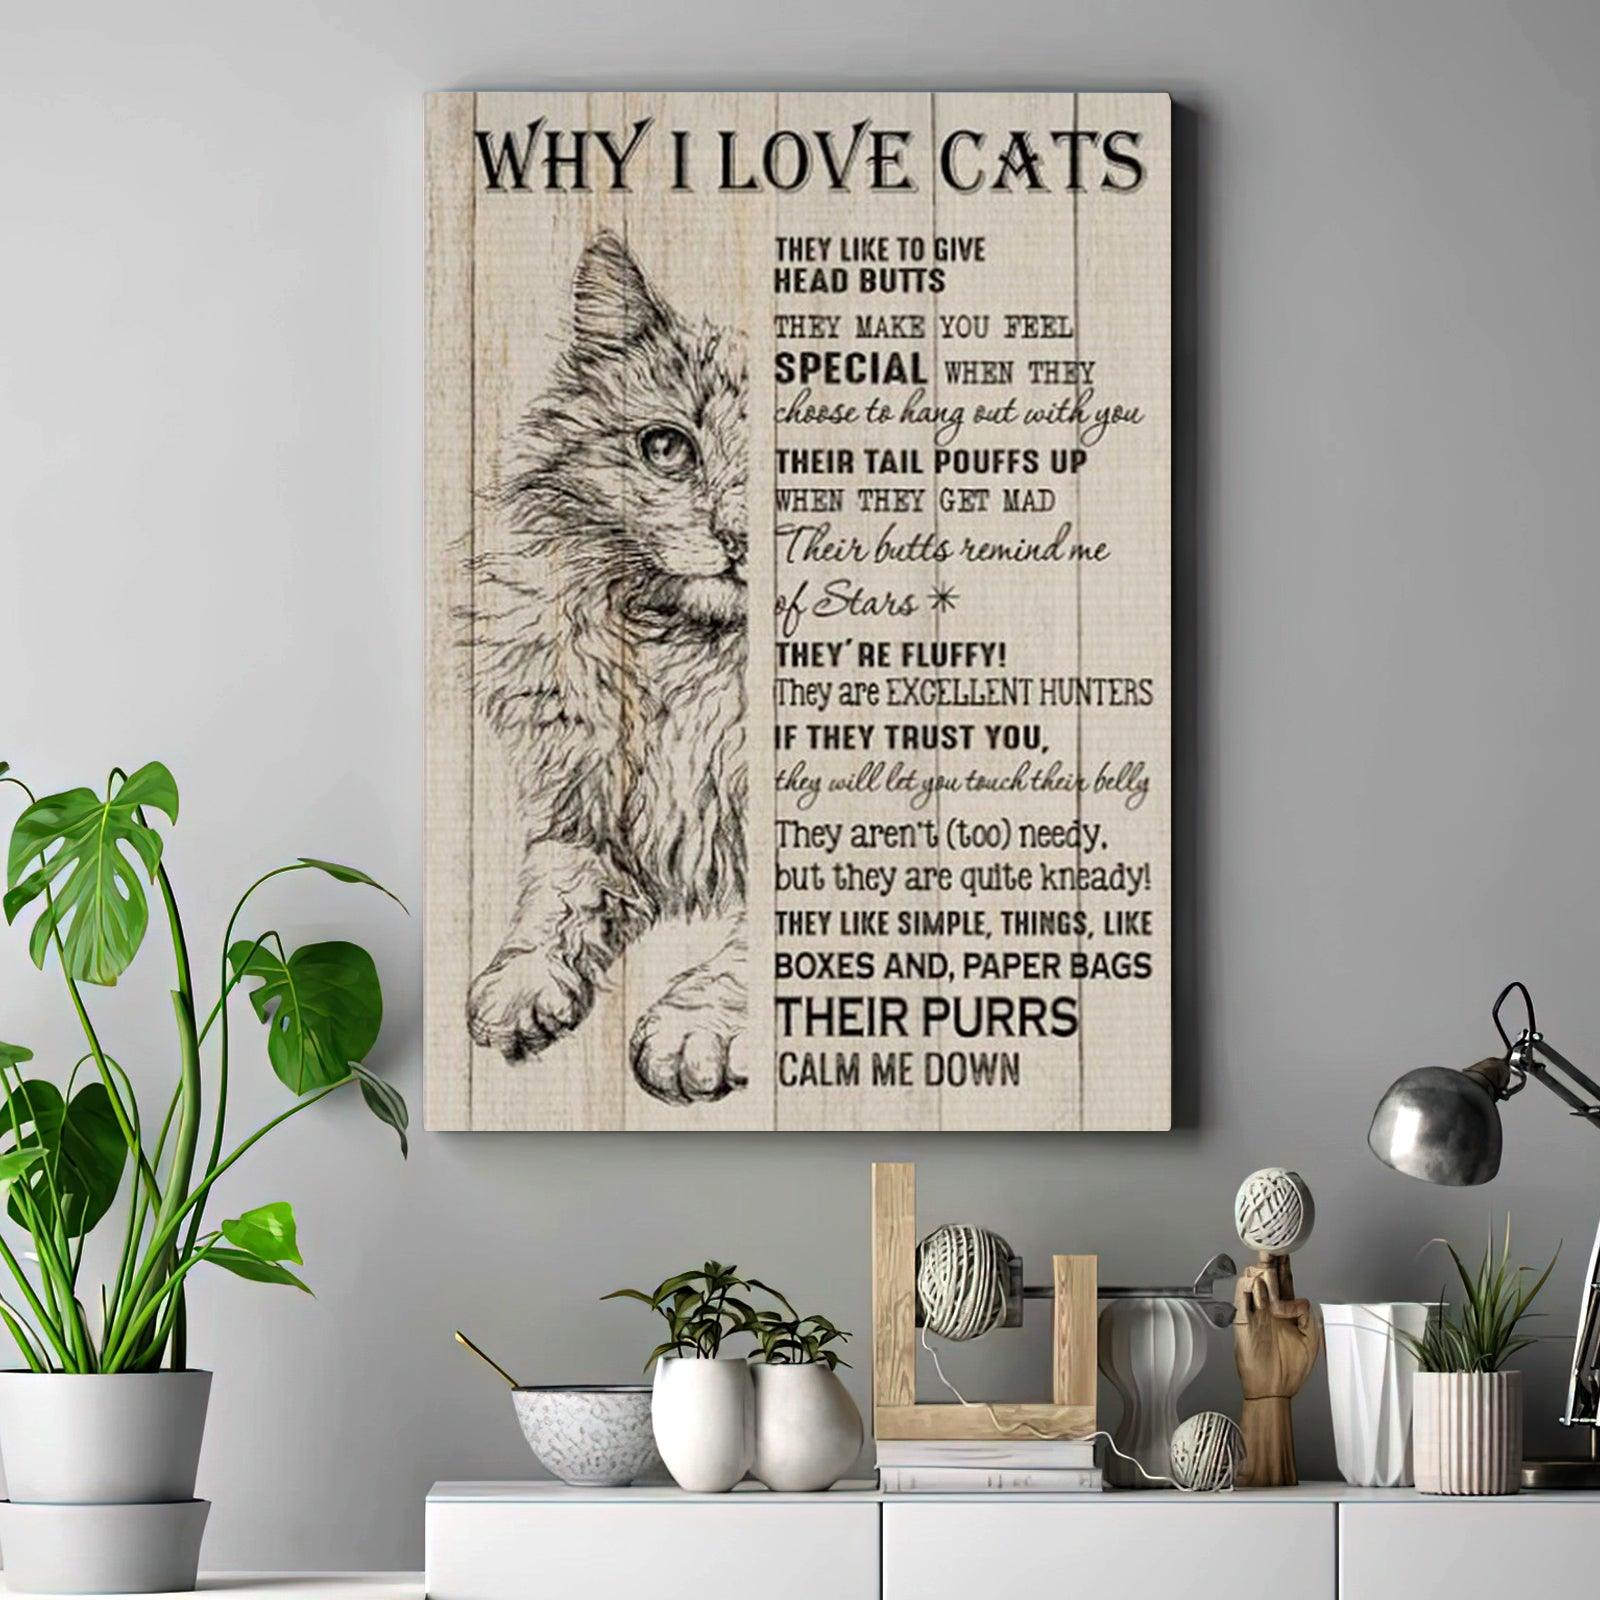 Cat Portrait Canvas - Why I Love Cats Their Purrs Calm Me Down Canvas - Perfect Gift For Cat Lover, Friend, Family - Amzanimalsgift